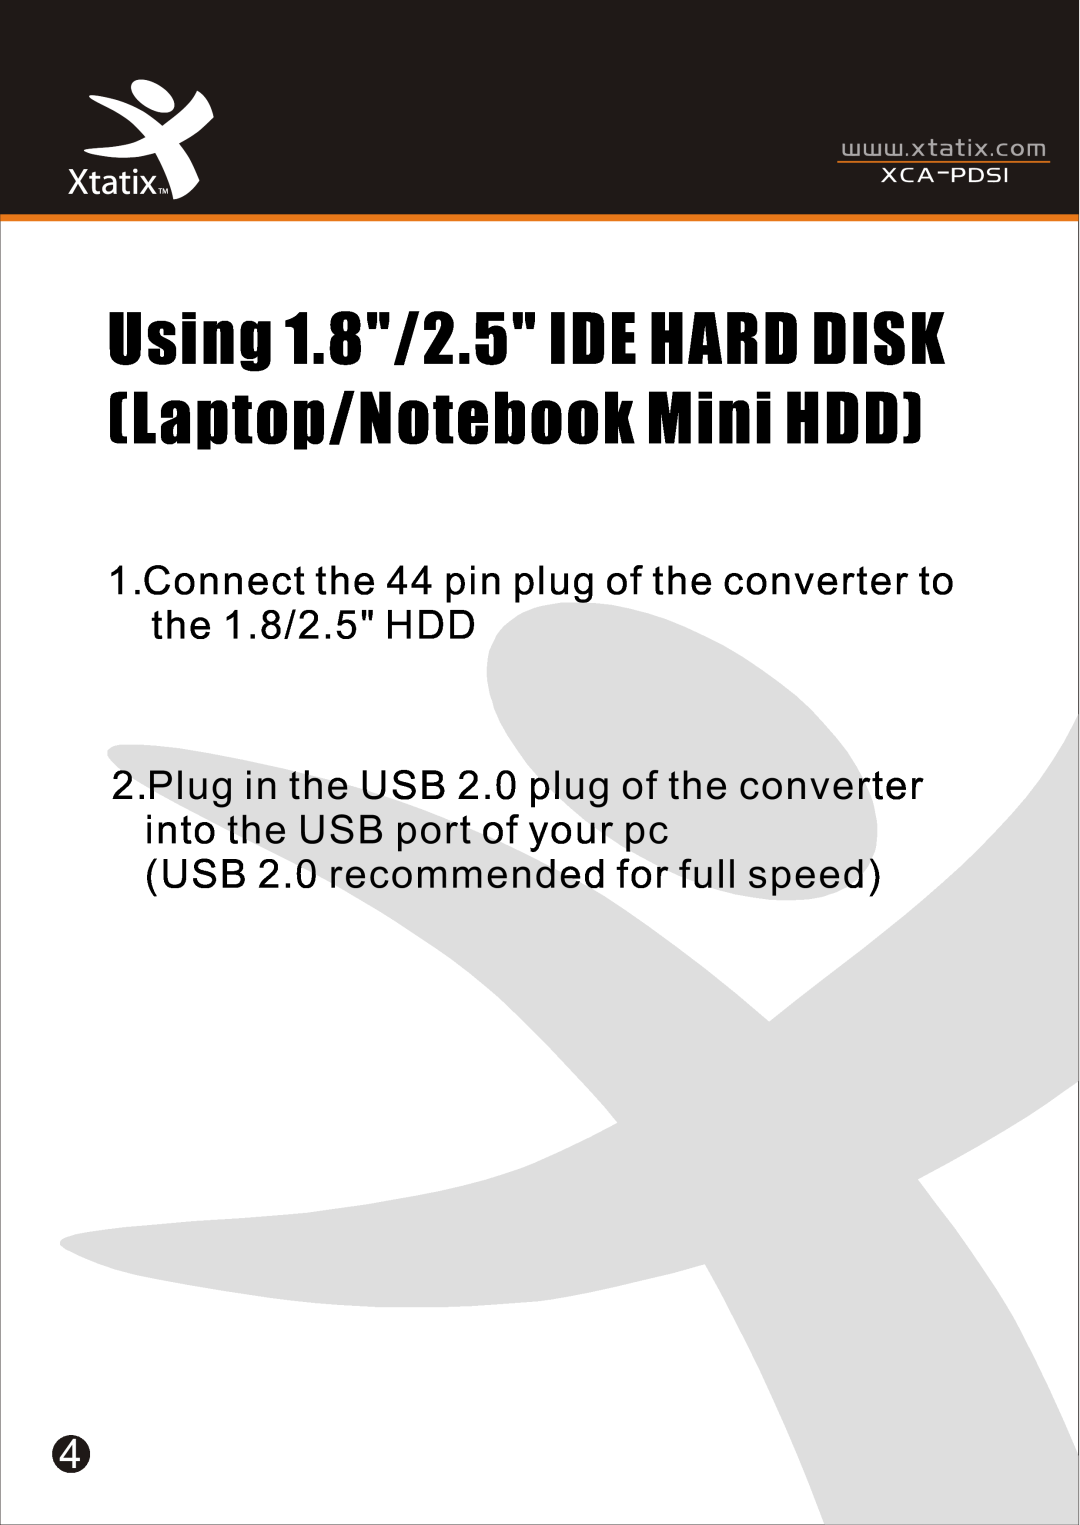 Xtatix XCA-PDSI Using 1.8/2.5 IDE HARD DISK Laptop/Notebook Mini HDD, USB 2.0 recommended for full speed, Xca - Pdsi 